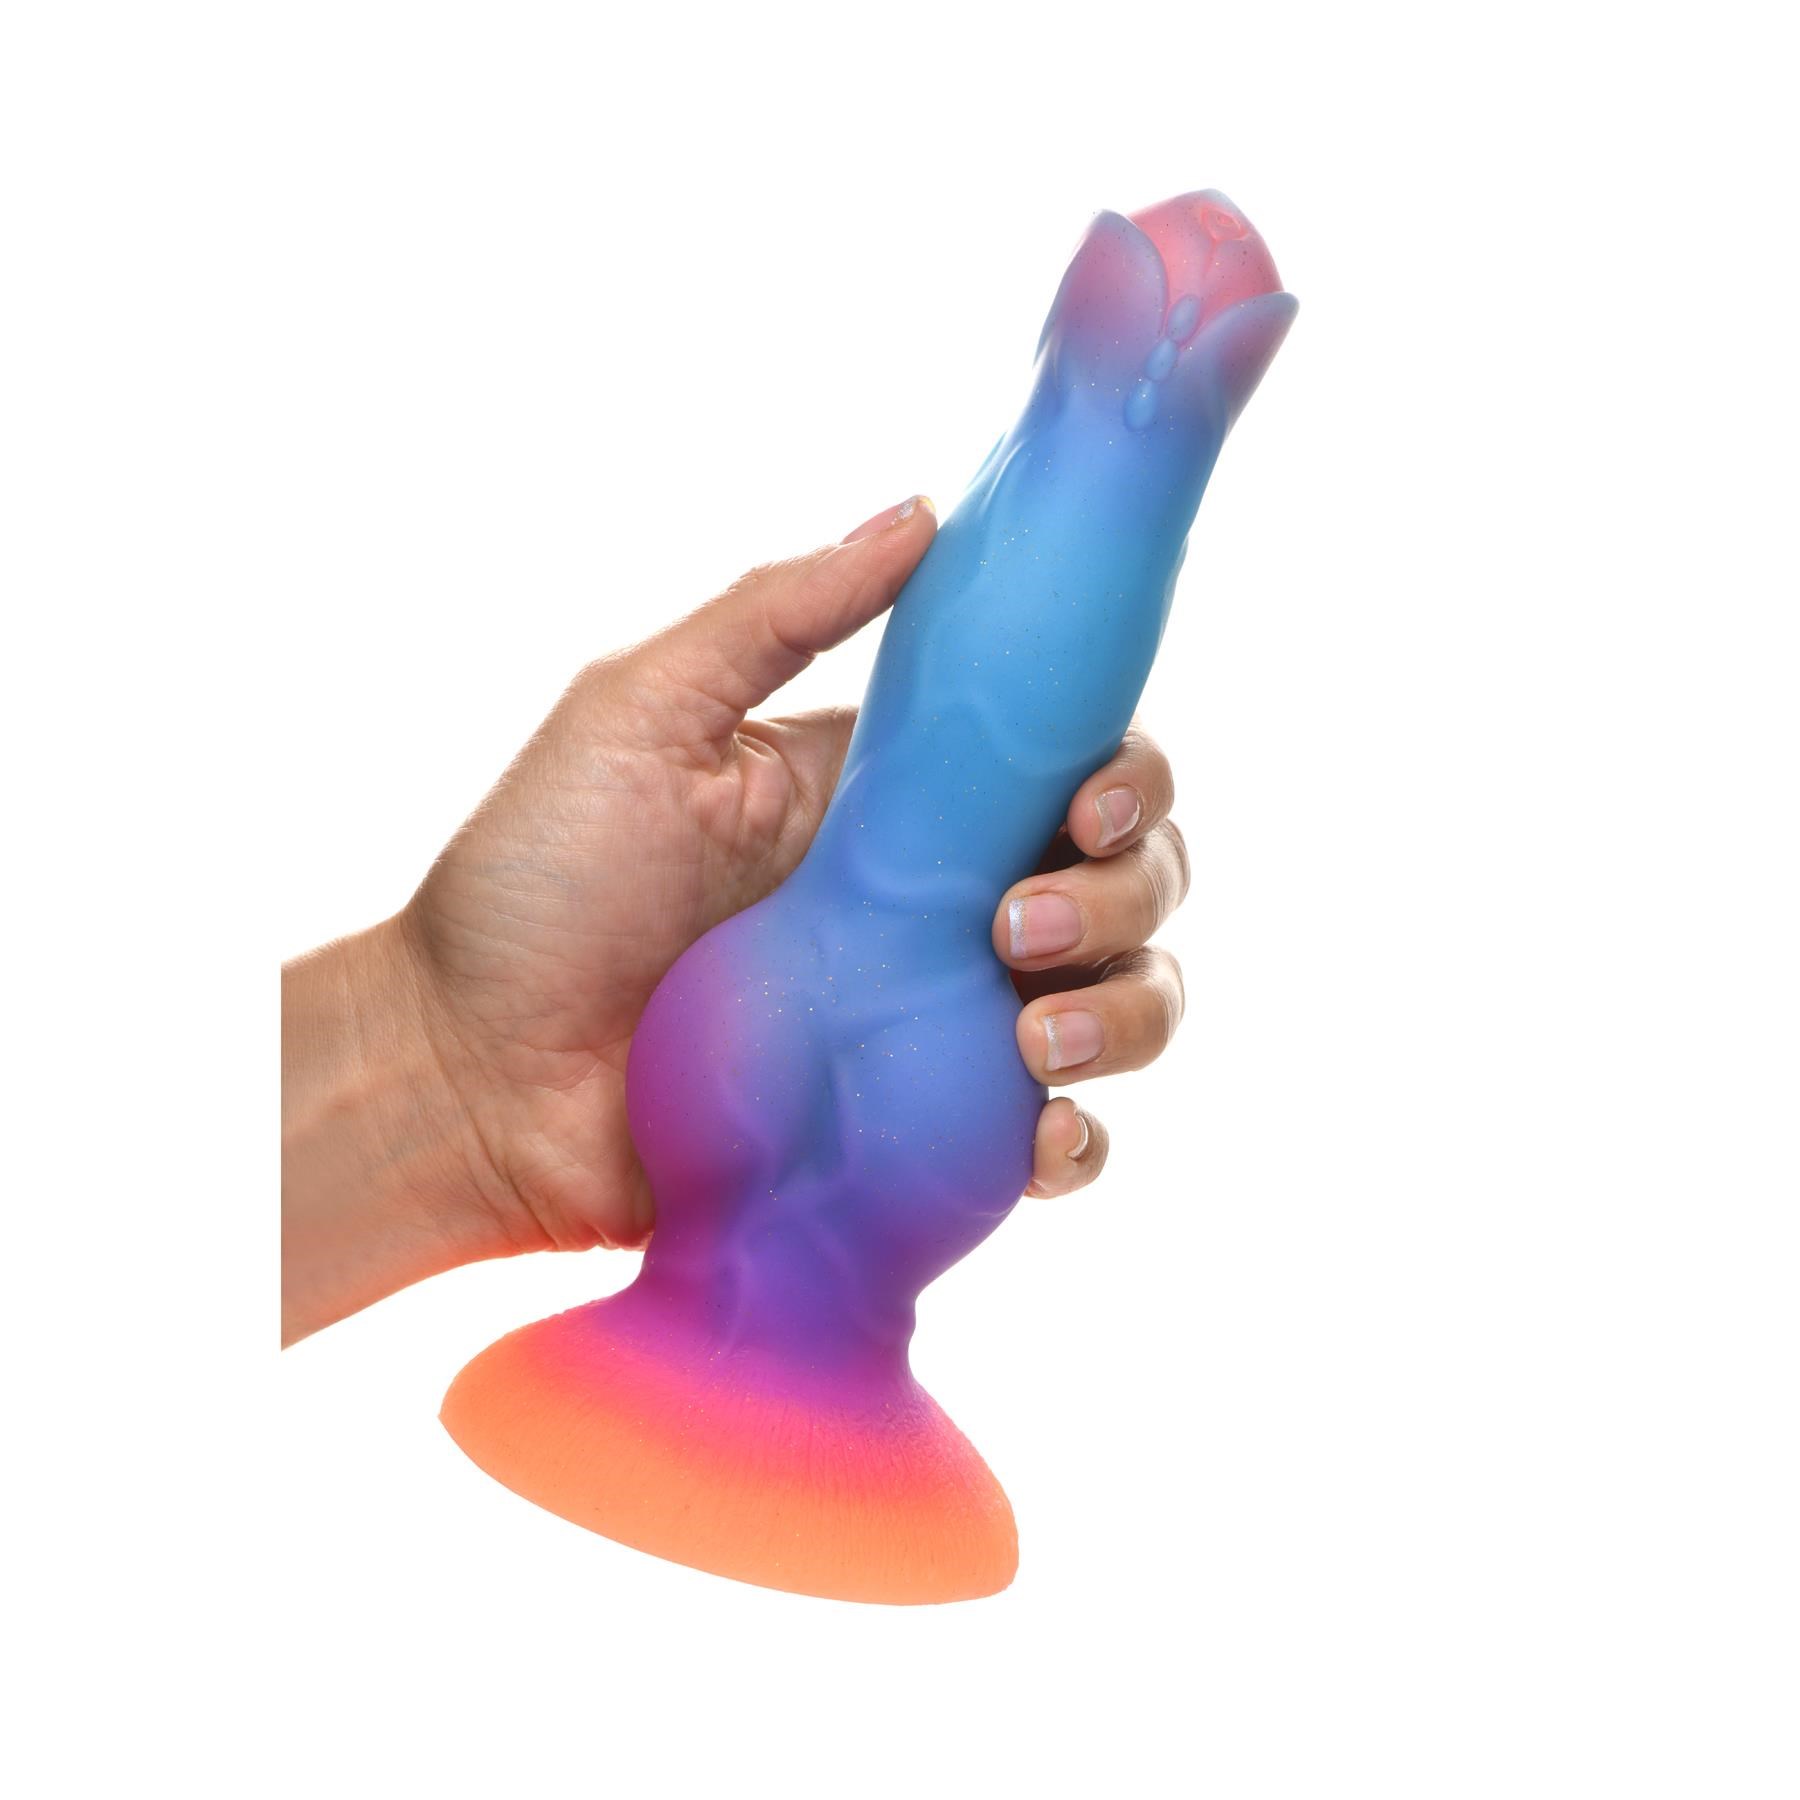 CreatureCocks Glow In The Dark Spacecock Dildo - Hand Shot to Show Size